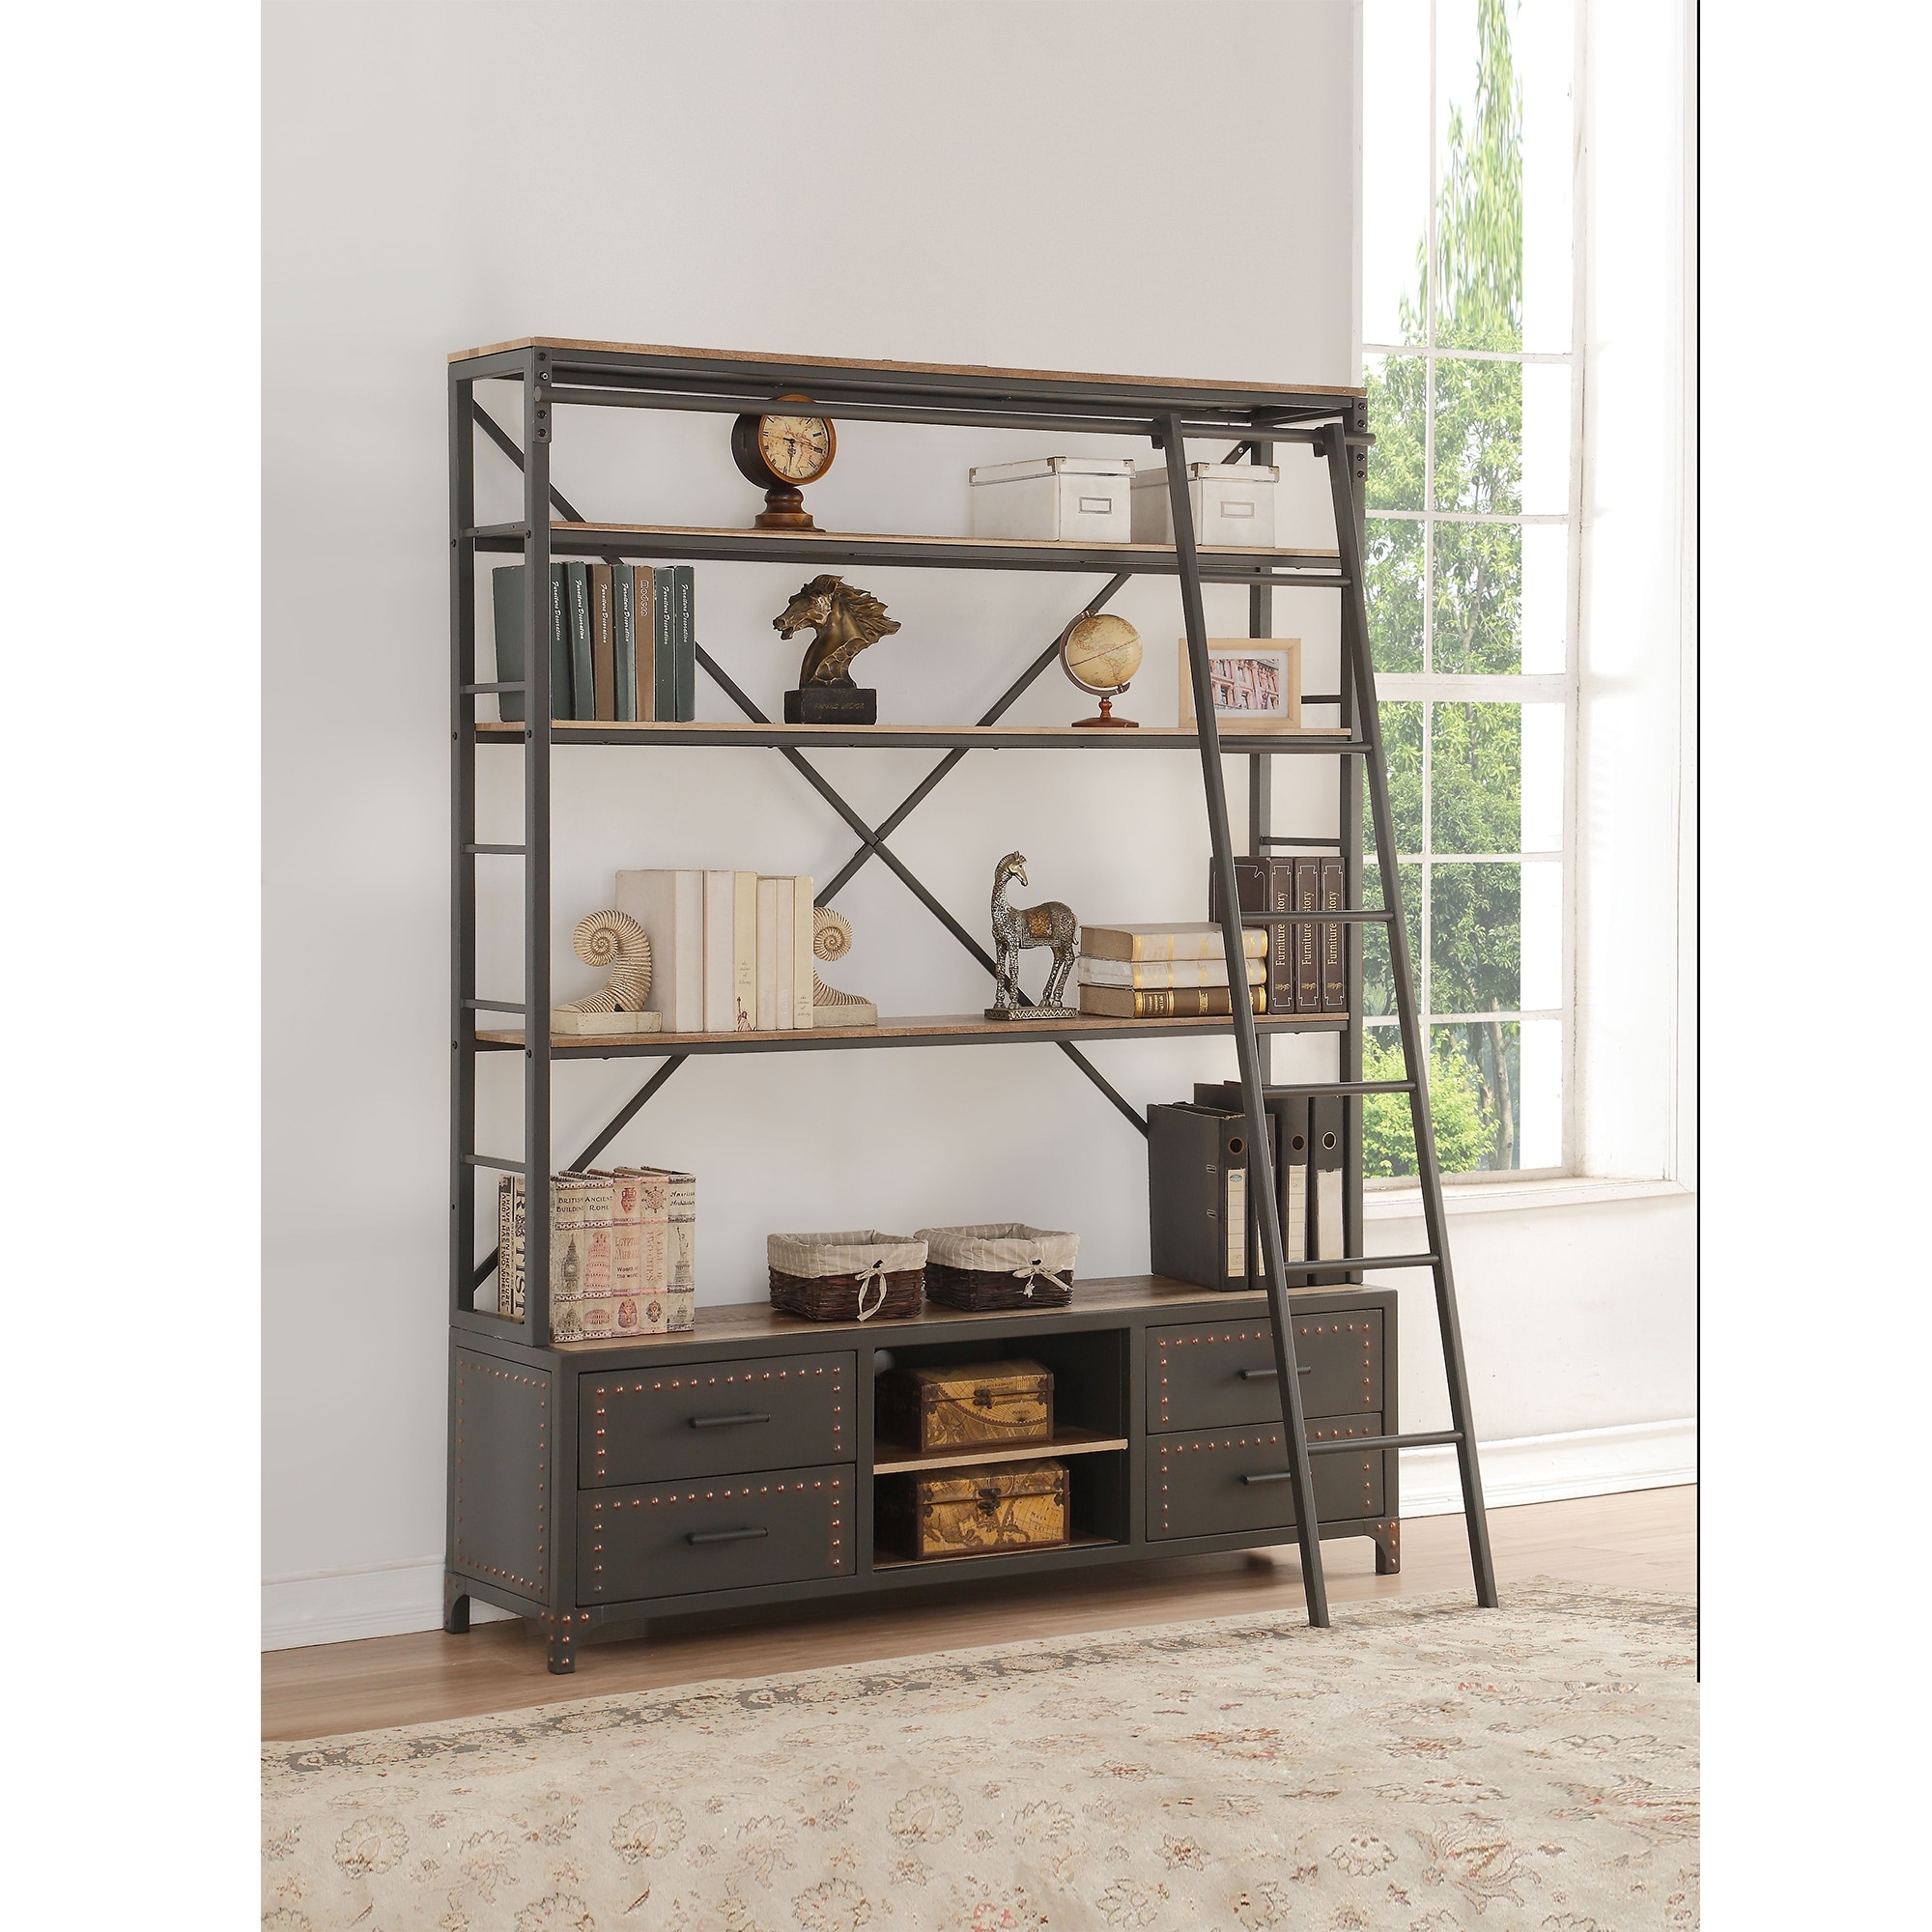 4-Tier File Cabinet with Drawers, Industrial Freestanding